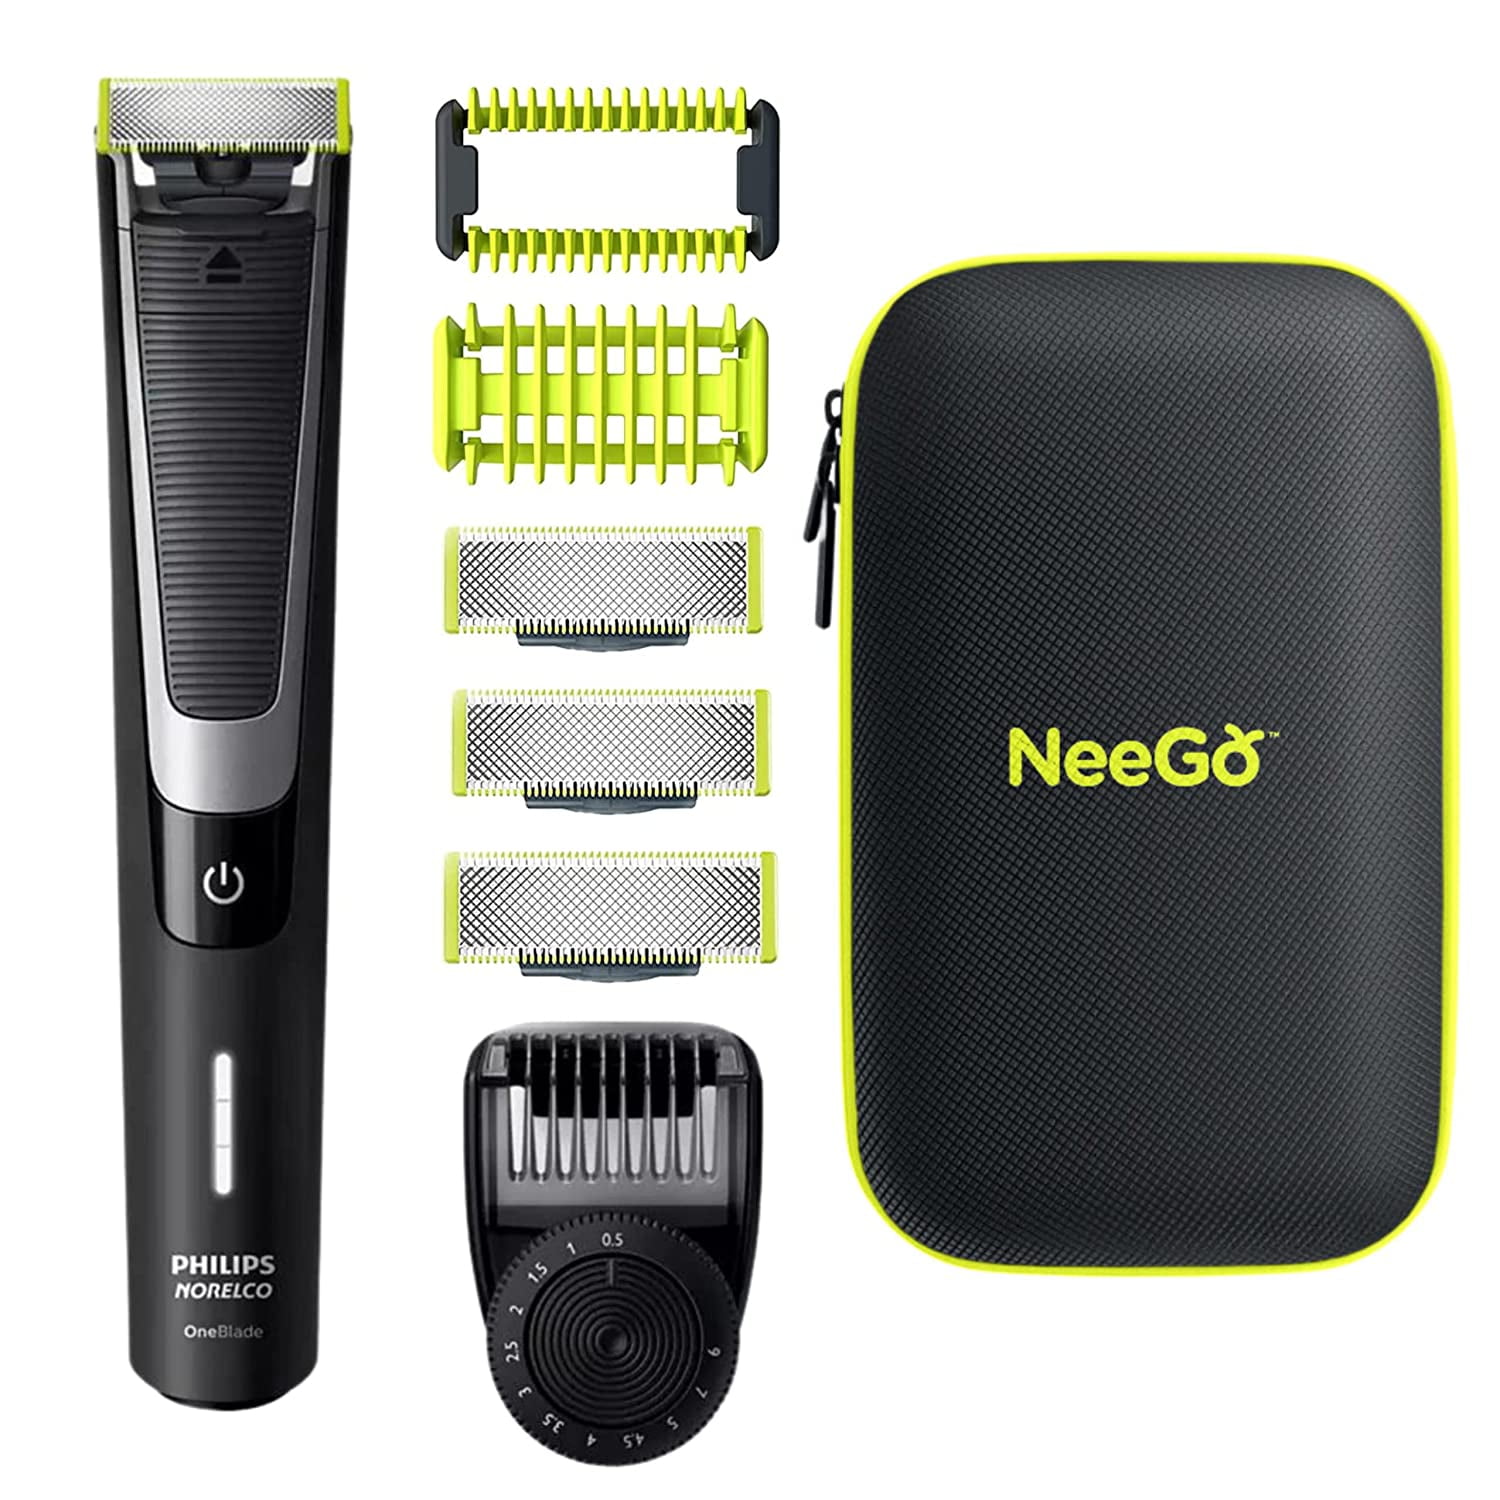 PHILIPS OneBlade Pro Kit, Hybrid Styler Electric Trimmer and Shaver, QP6510  + NeeGo Case Norelco Oneblade - Walmart.com